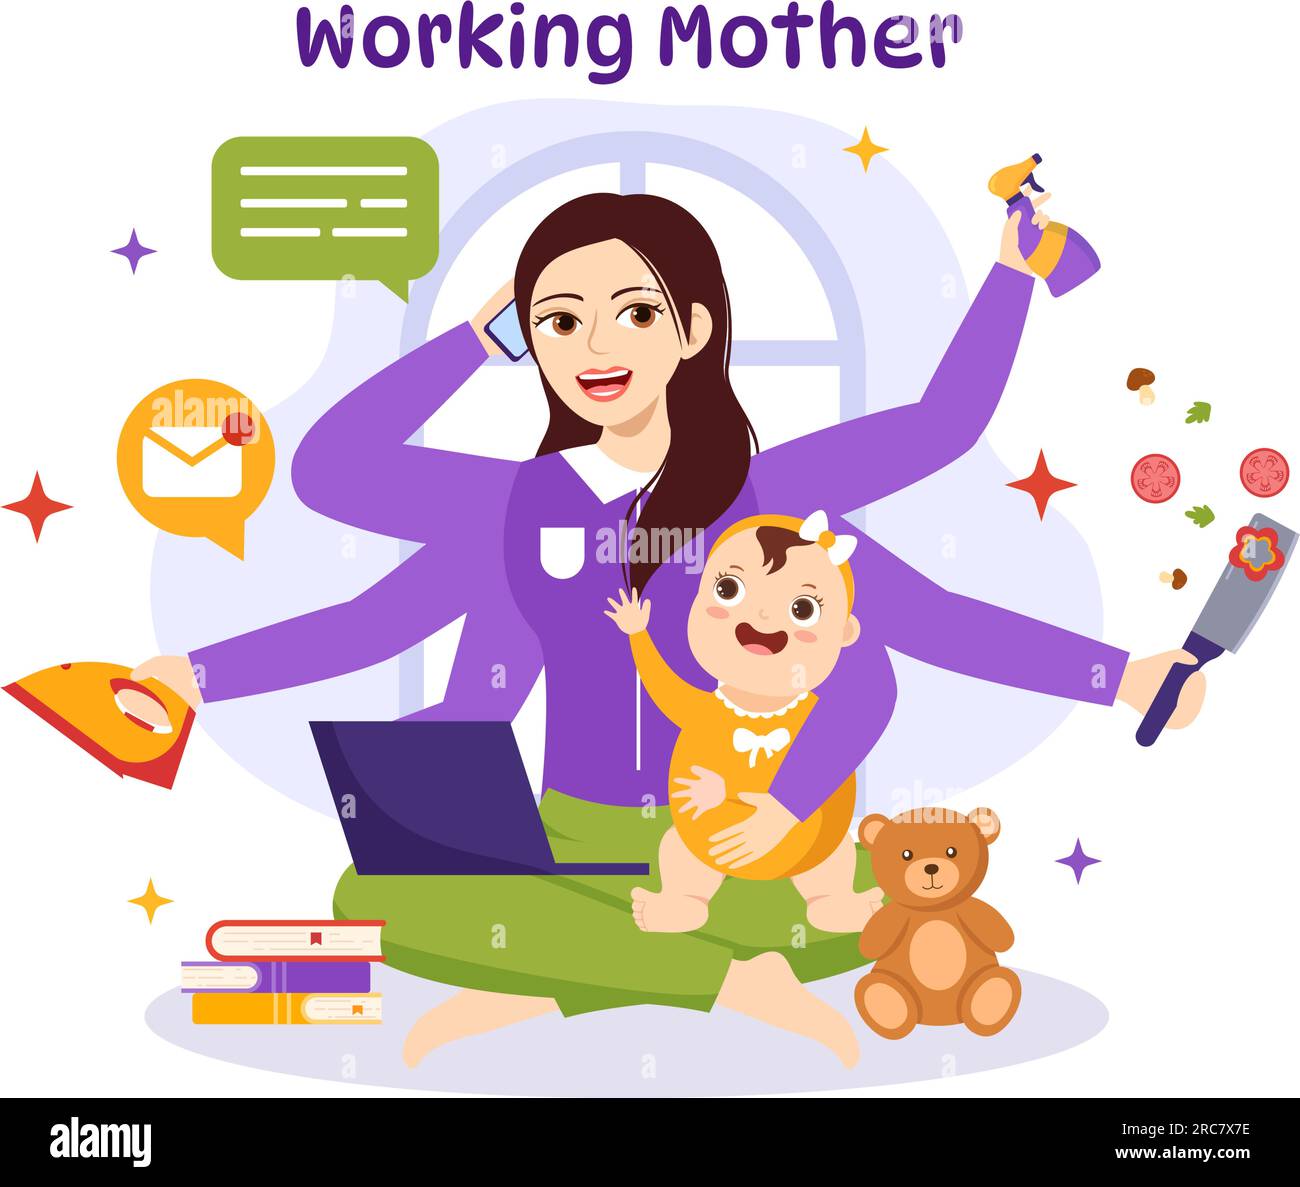 Working Mother Vector Illustration with Mothers who does Work and Takes Care of her Kids at the Home in Multitasking Cartoon Hand Drawn Templates Stock Vector